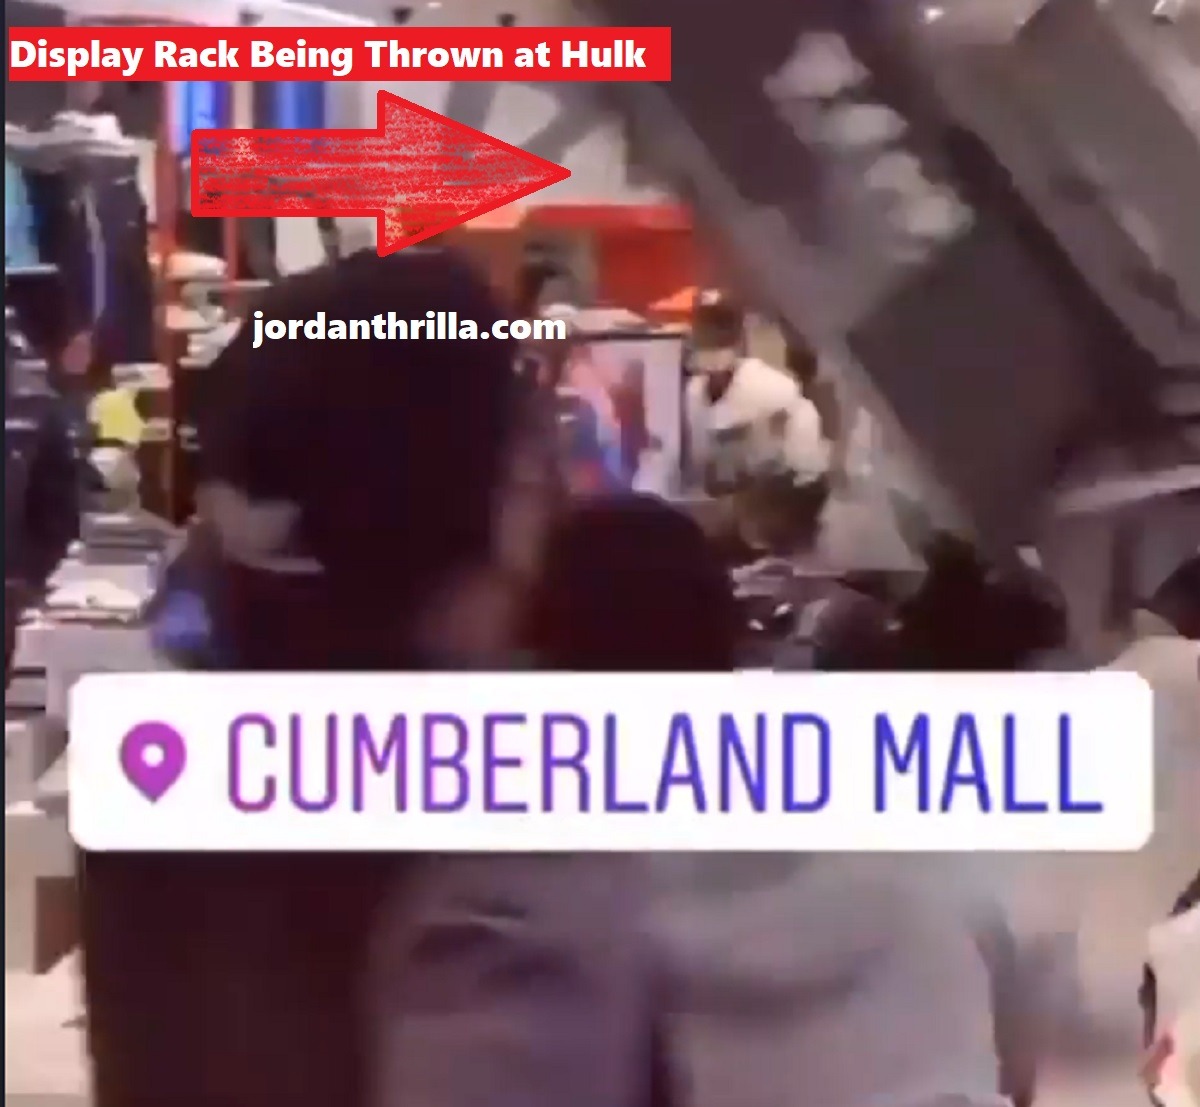 All Star Weekend Atlanta Massive Fight at DTLR in Cumberland Mall with Man Dubbed "Hulk"